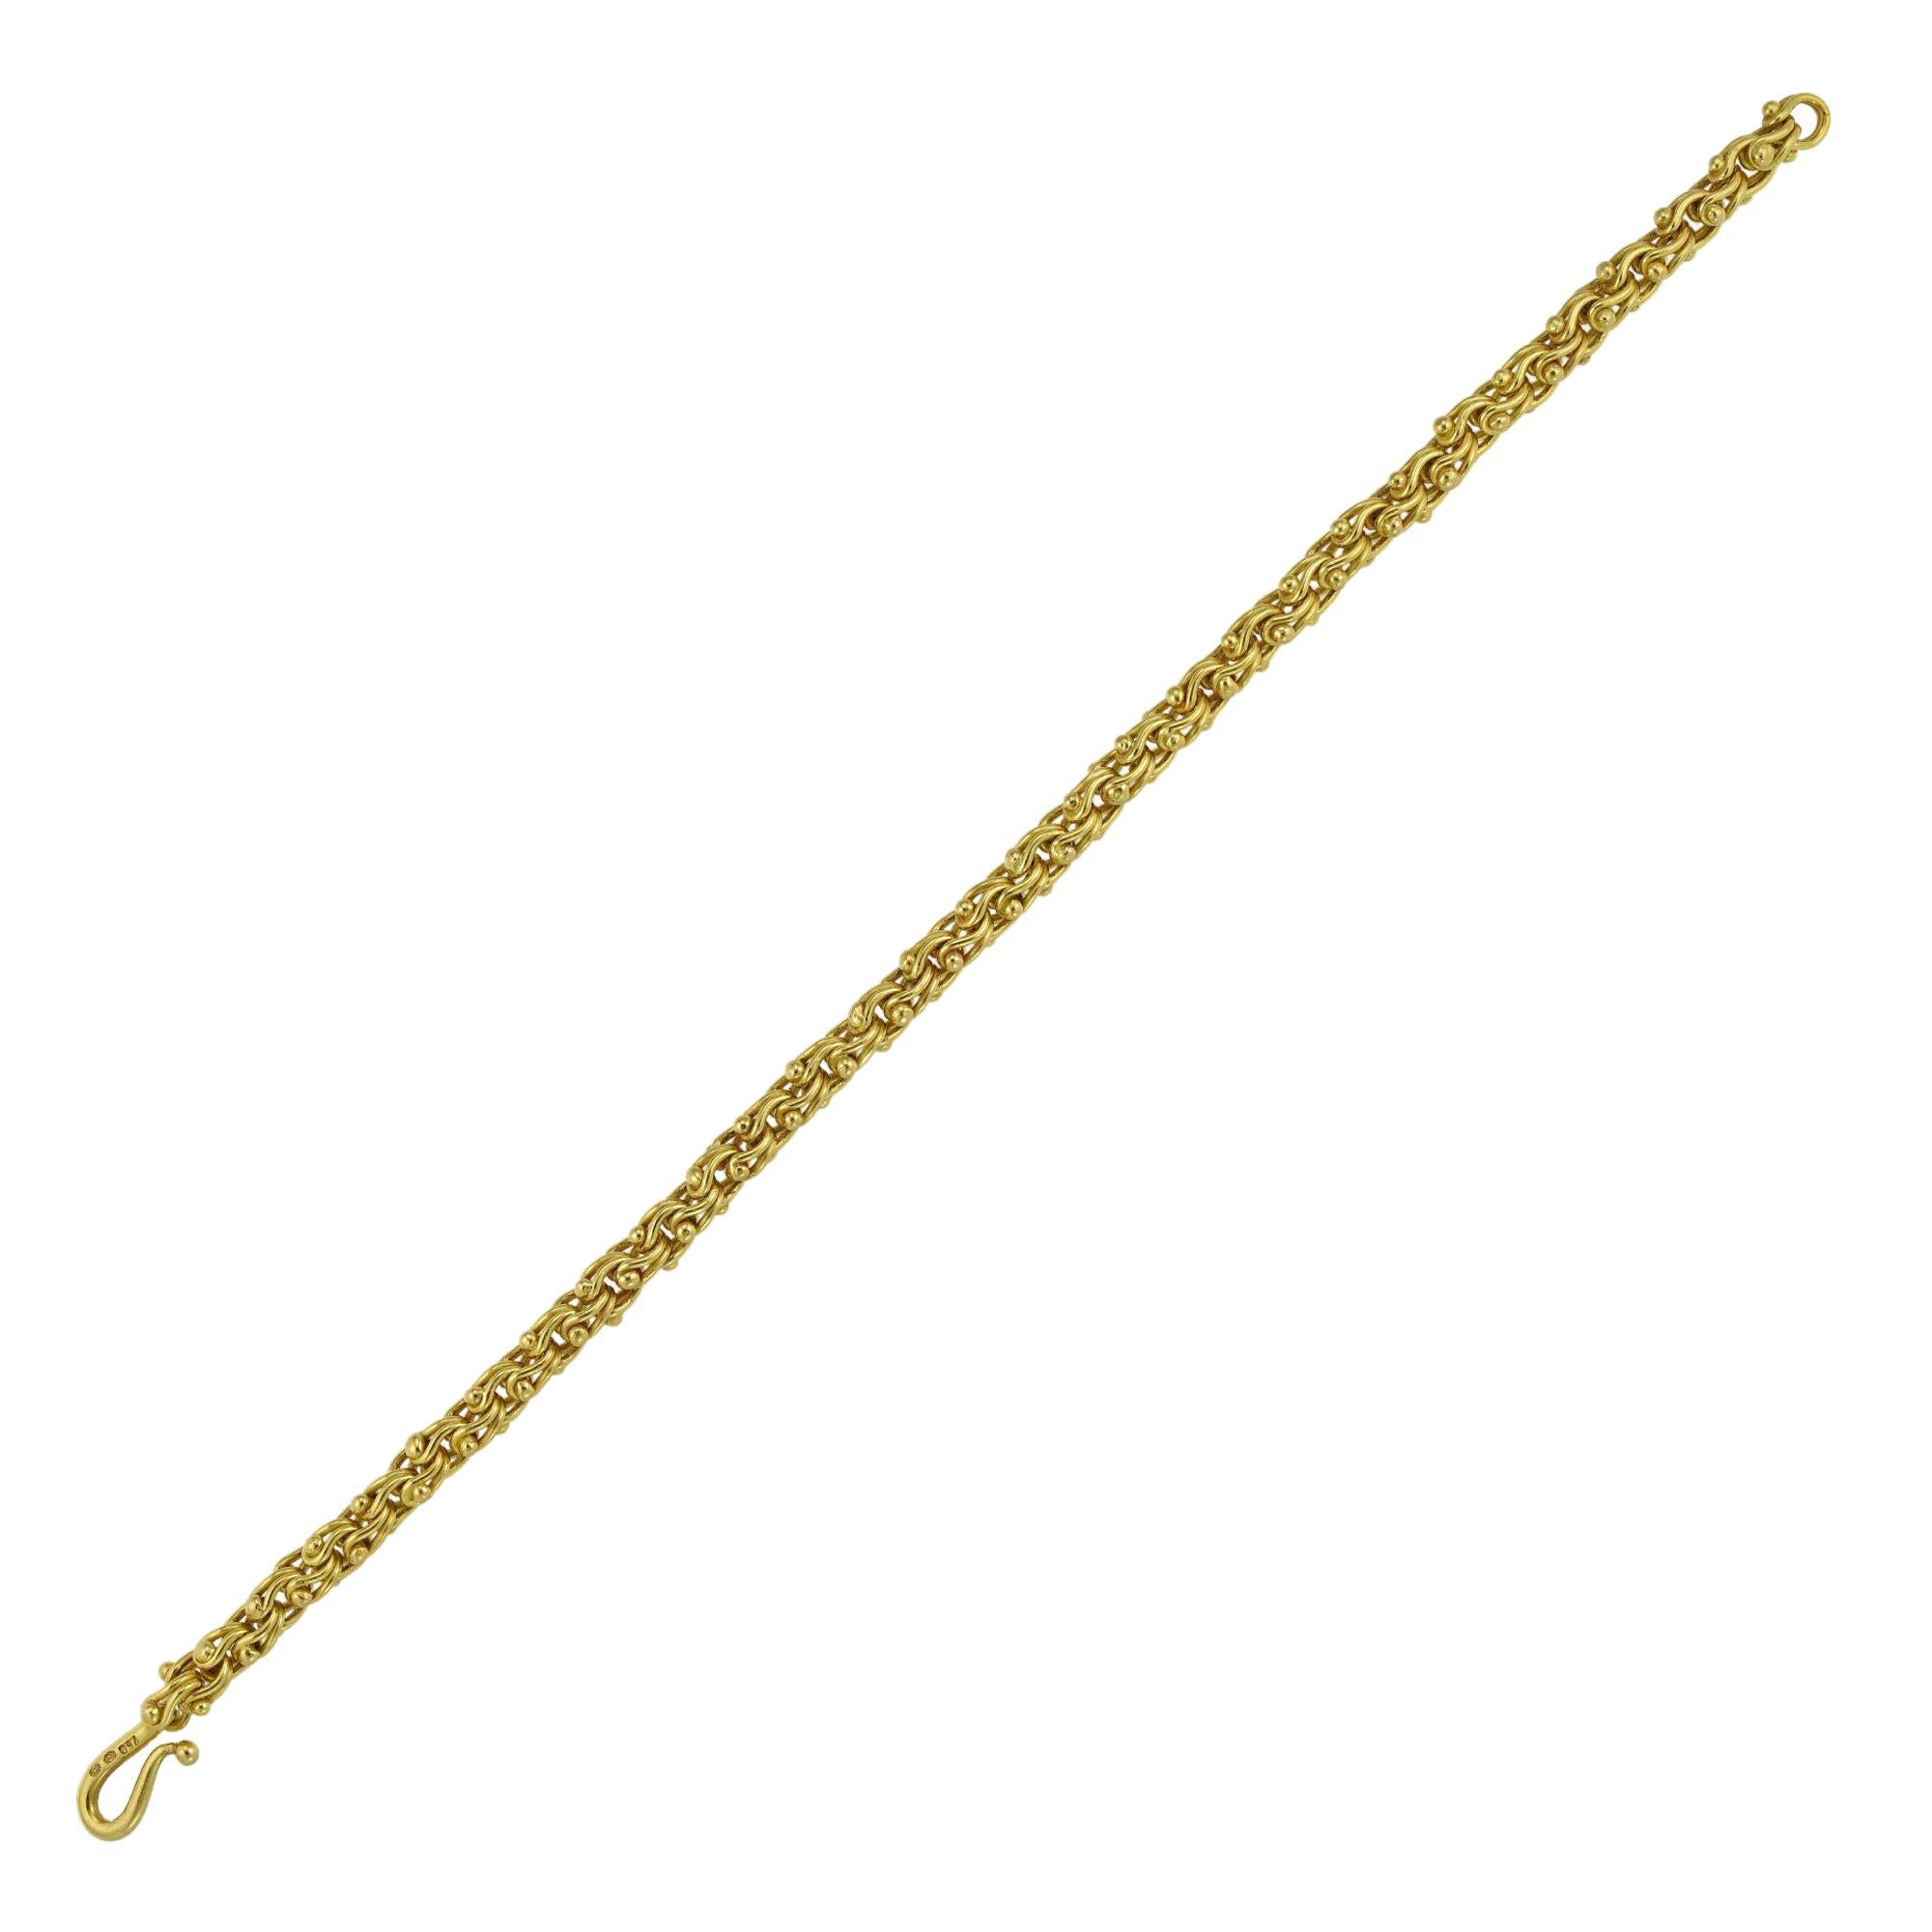 A handmade Water Ballet bracelet by Lucie Heskett-Brem the Gold Weaver of Lucerne, hallmarked 18ct gold, measuring approximately 19 x 0.5 cm, gross weight 20.1 grams. 

Should you choose to make this purchase we would be delighted to send it to you